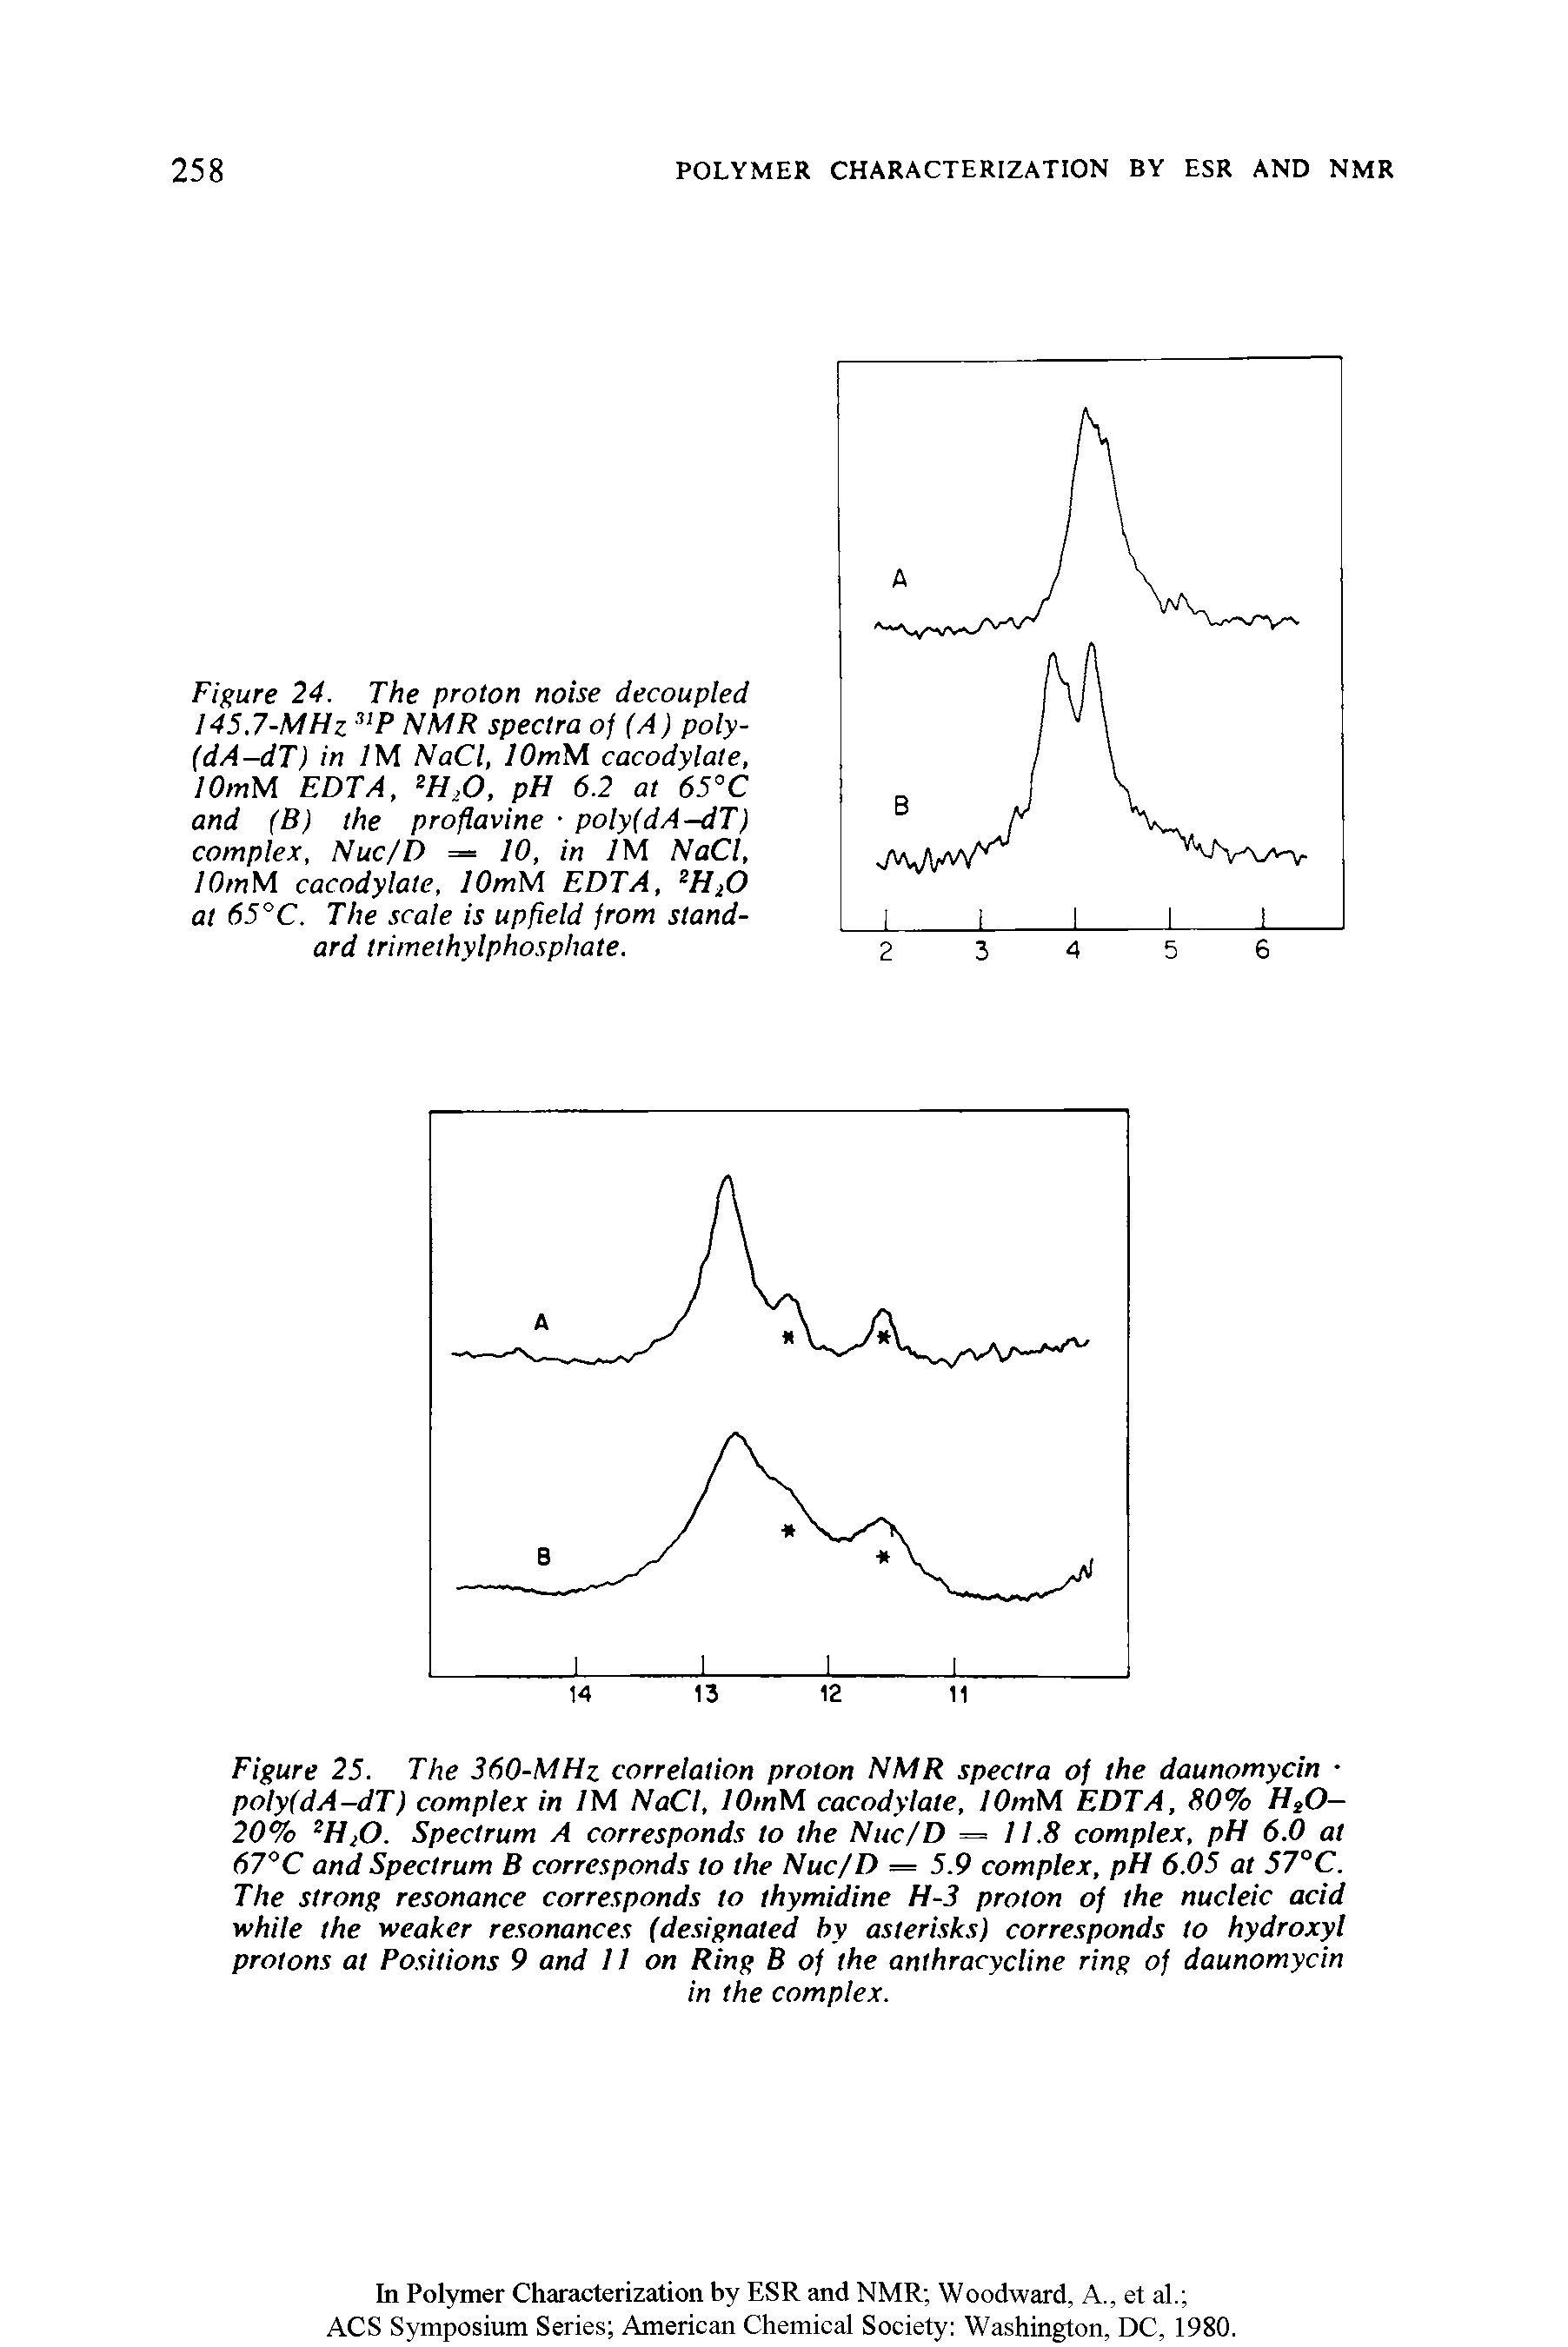 Figure 24. The proton noise decoupled 145.7-MHz 31P NMR spectra of (A) poly-(dA-dT) in 1M NaCl, lOmM cacodylate, lOmM EDTA, H20, pH 6.2 at 65°C and (B) the proflavine poly(dA-dT) complex, Nuc/D = 10, in 1M NaCl, lOmNi cacodylate, lOmM EDTA, 2H20 at 65°C. The scale is upfleld from standard trimethylphosphate.